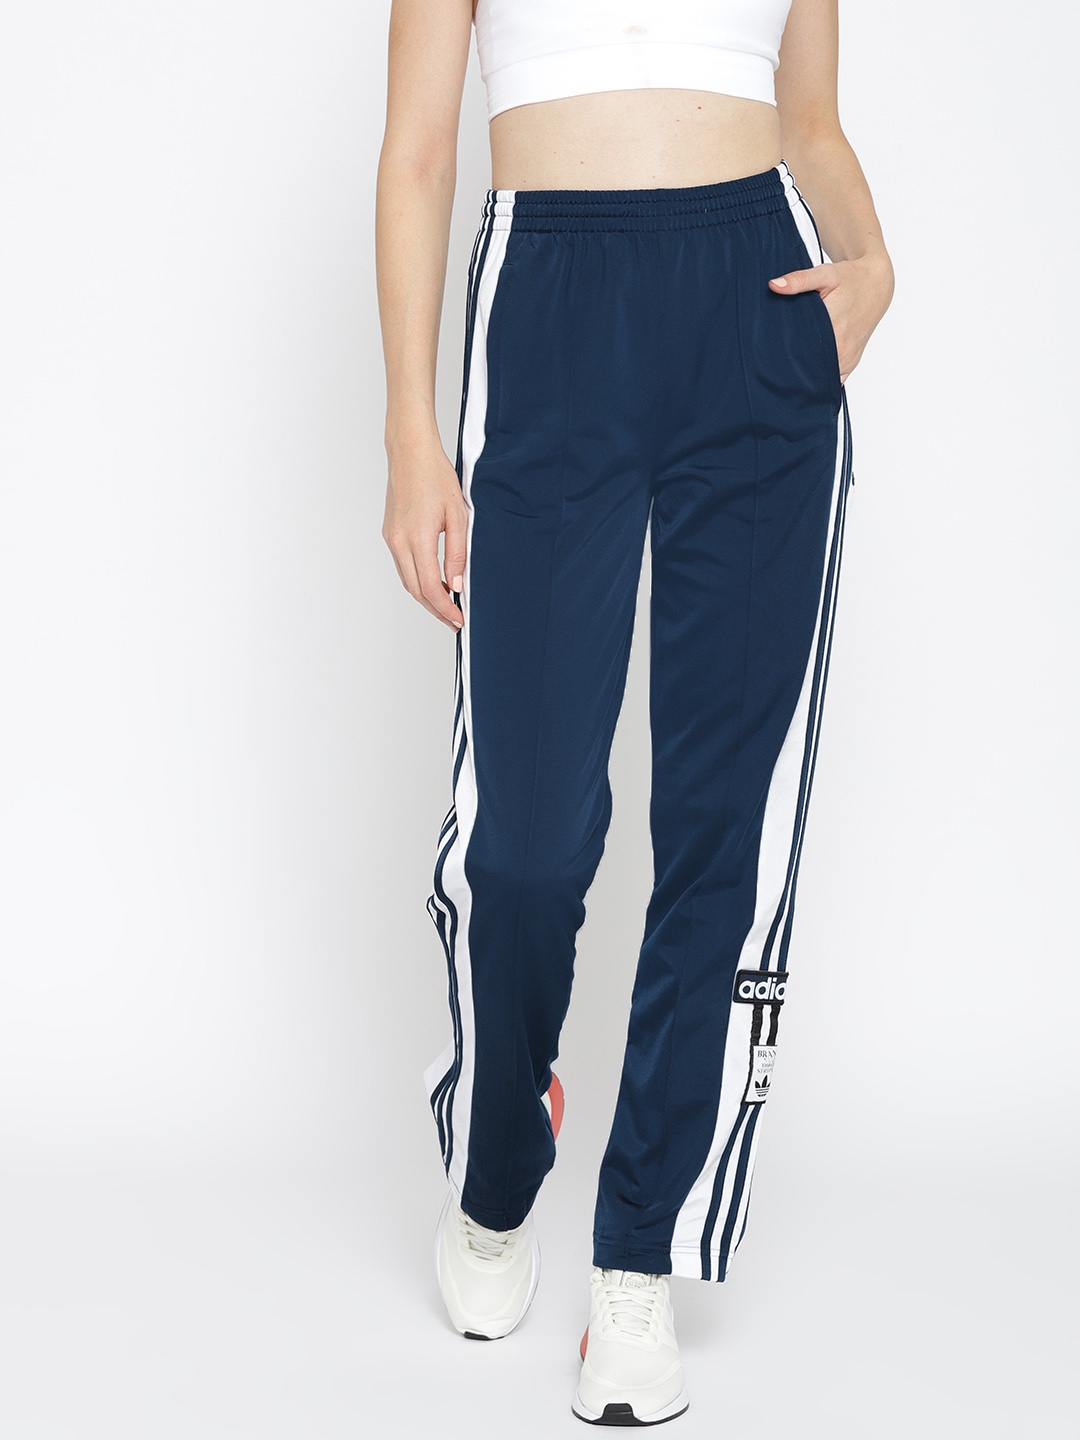 Adidas Side Button Track Pants Luxembourg, SAVE 44% - mpgc.net